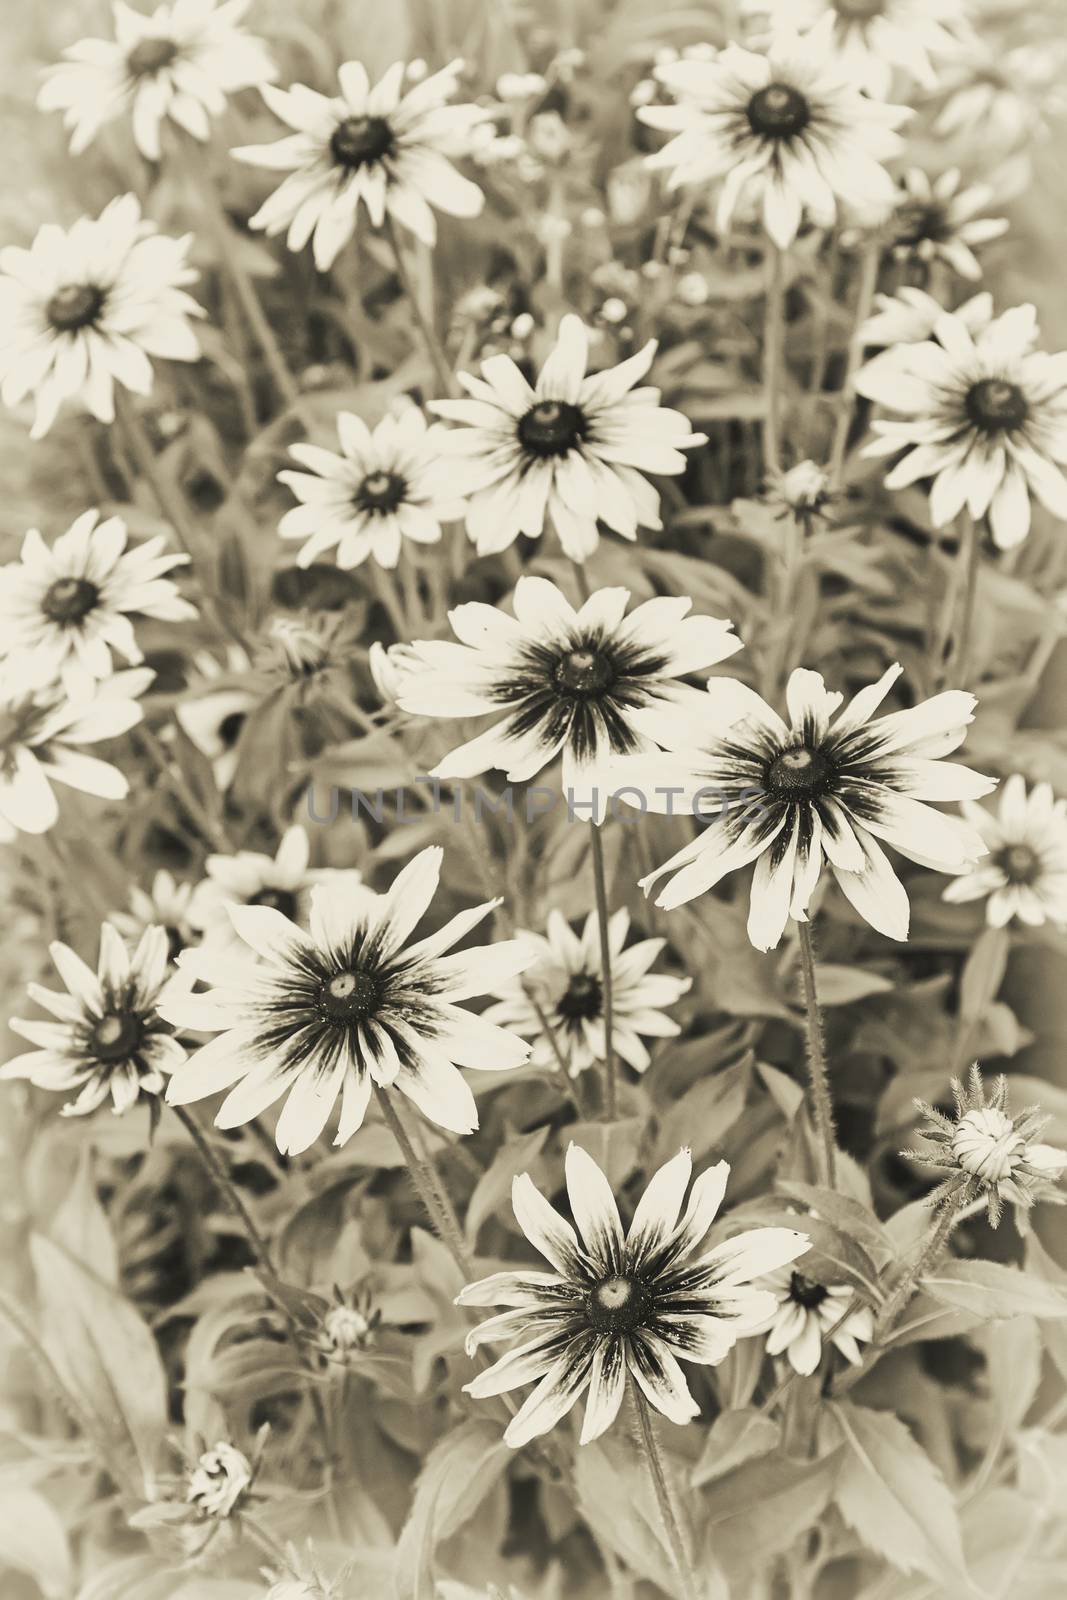  Beautiful large flowers of rudbeckia in the garden in the flowerbed. Black - and- white image.